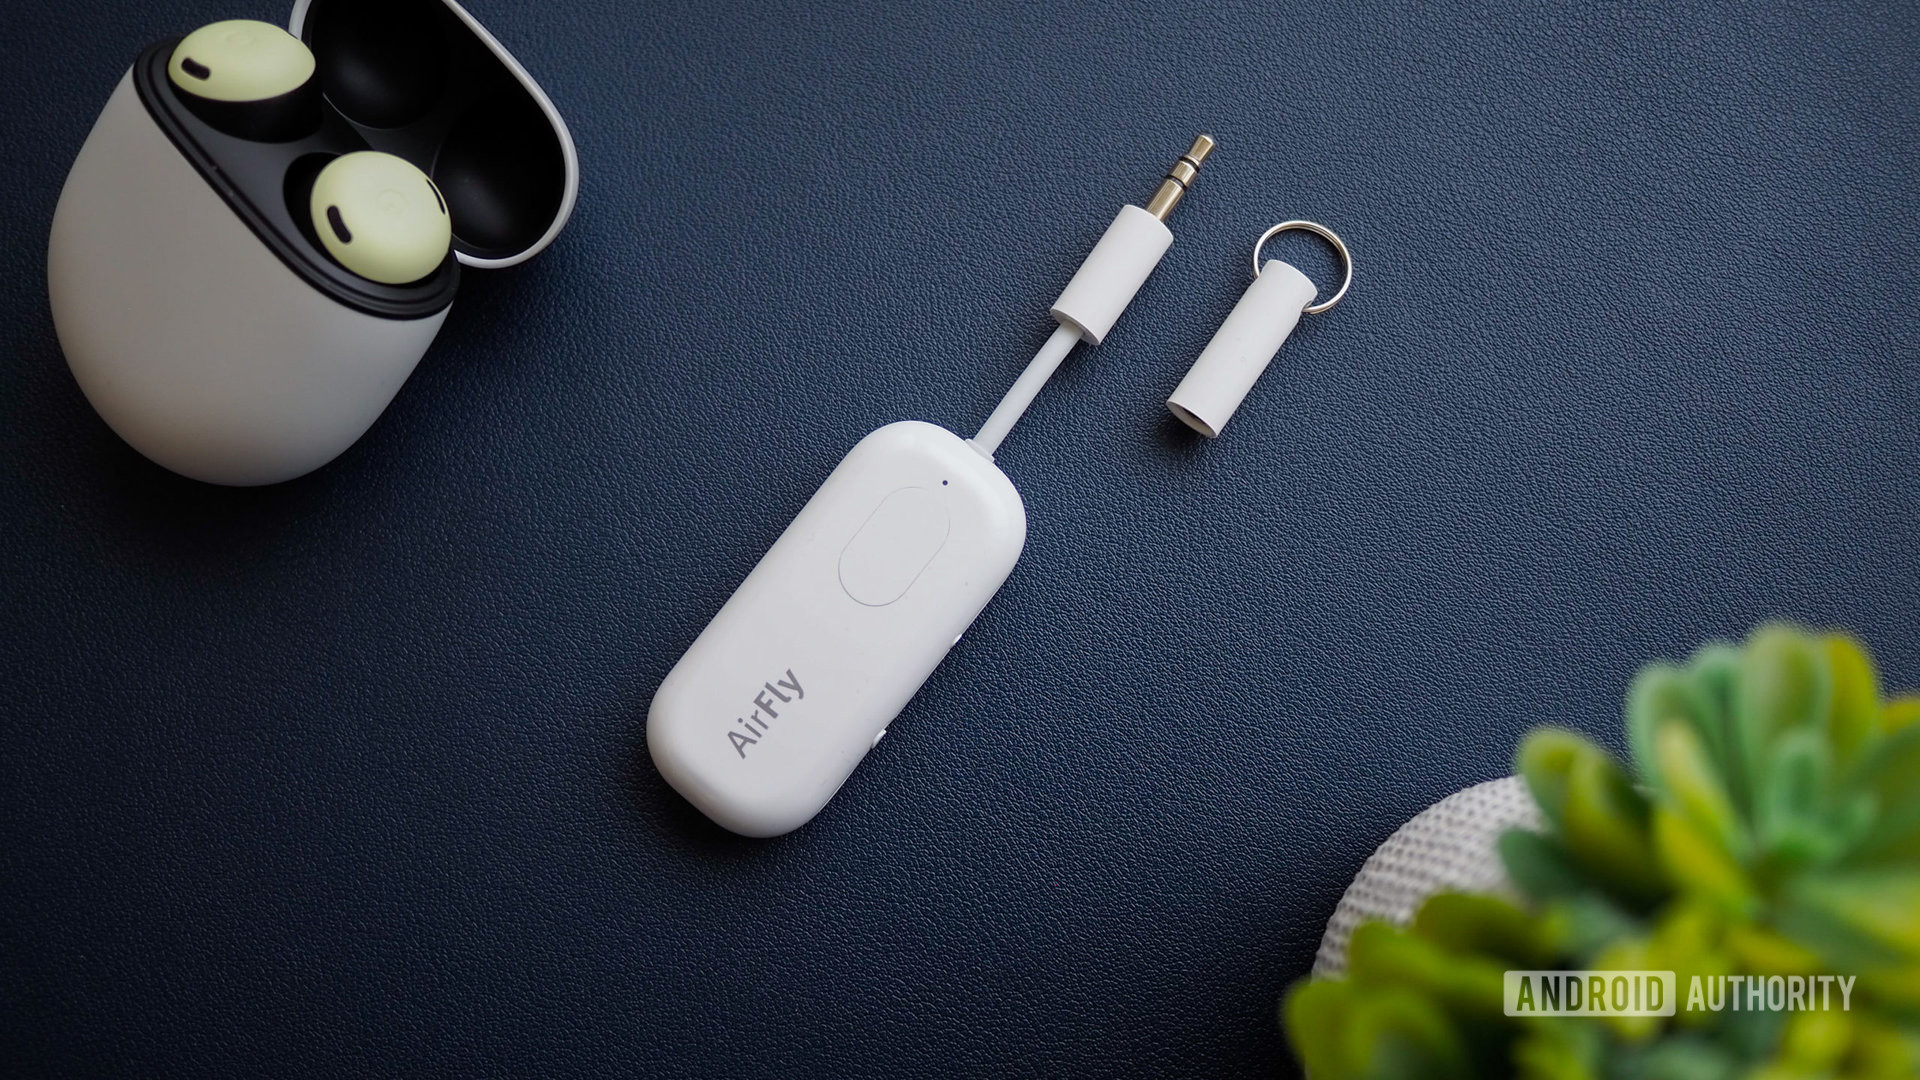 This small Bluetooth dongle is now my essential travel and road